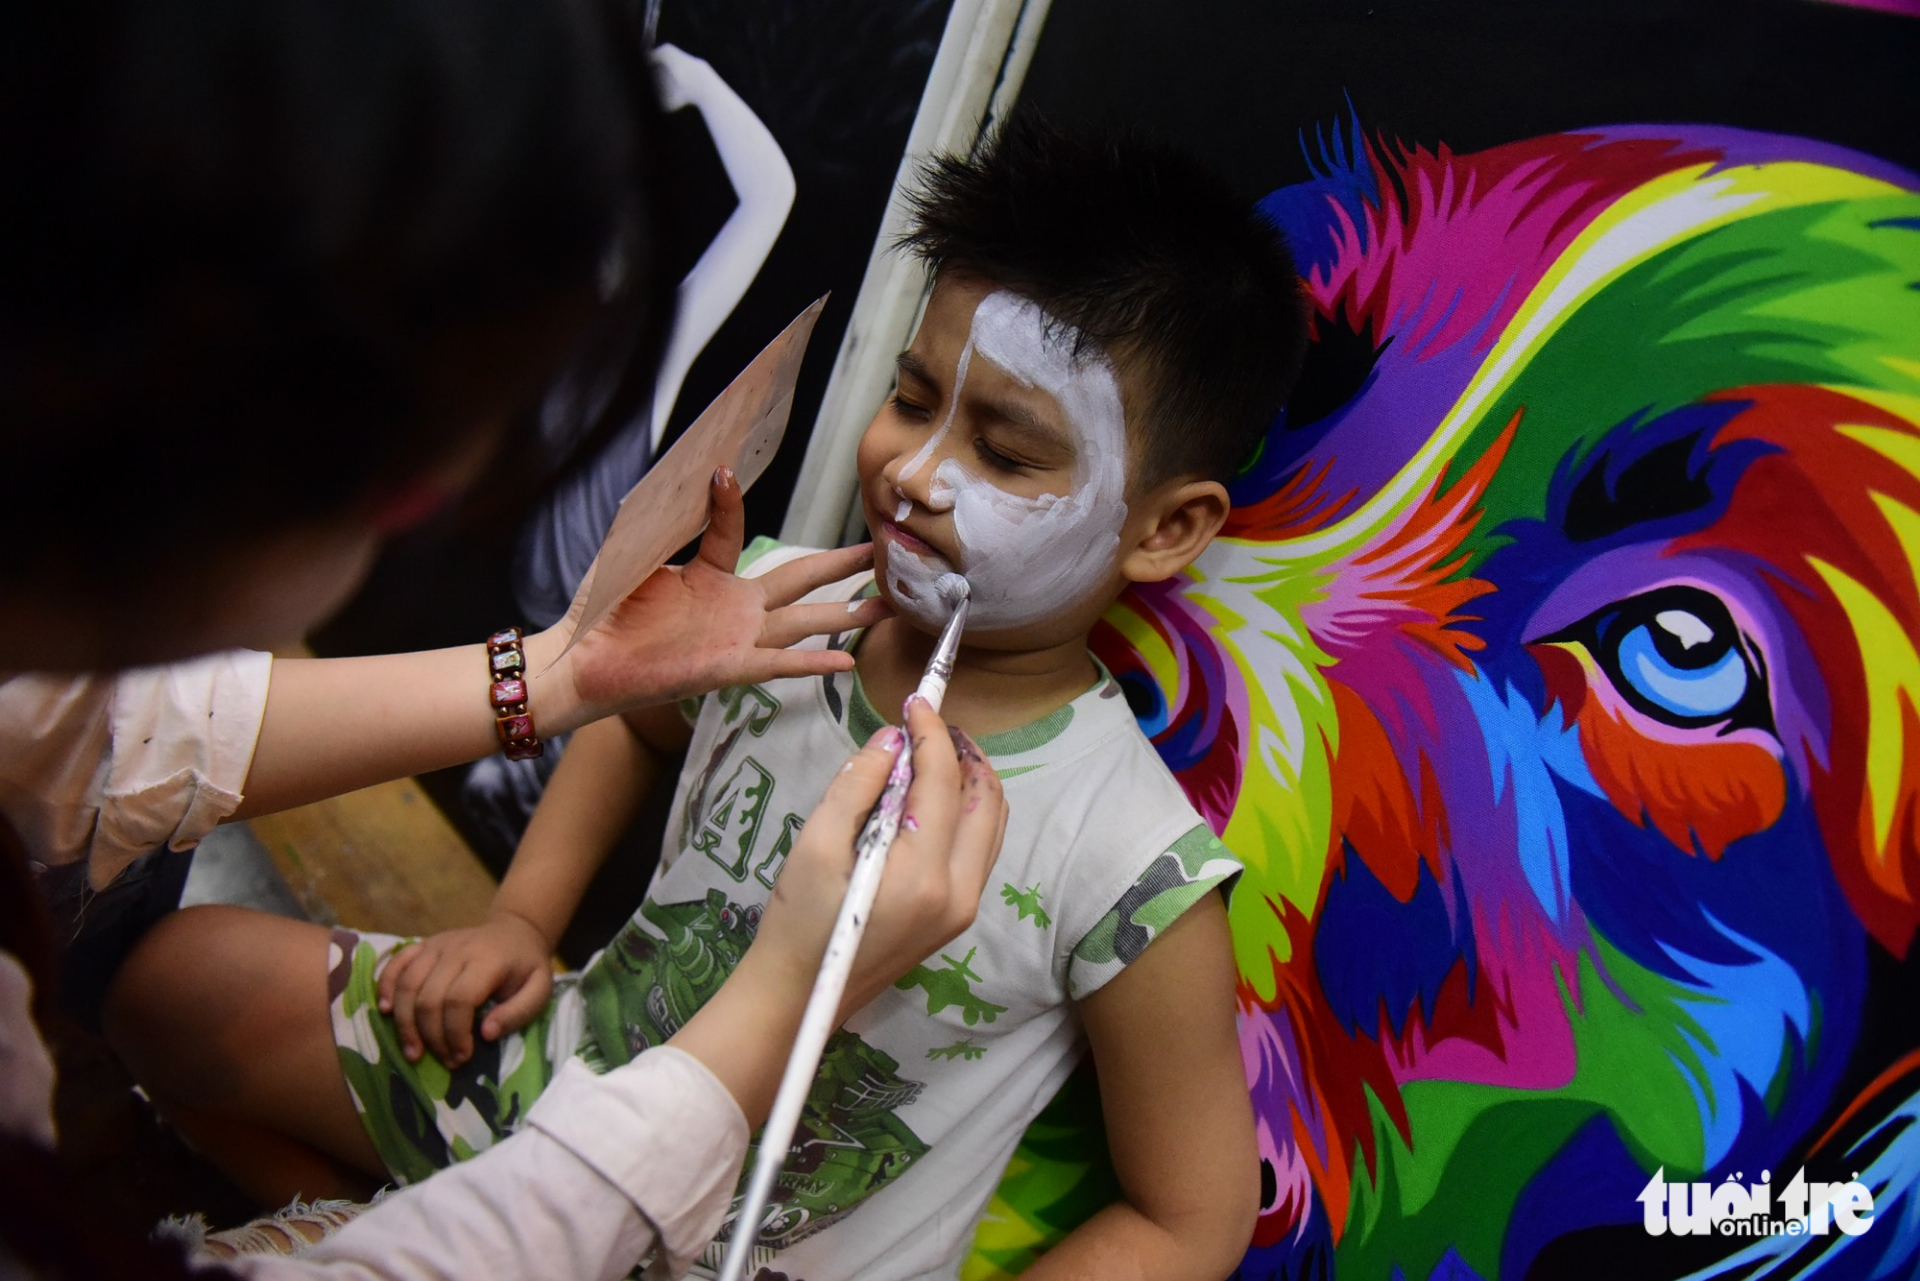 A young boy gets his face painted.